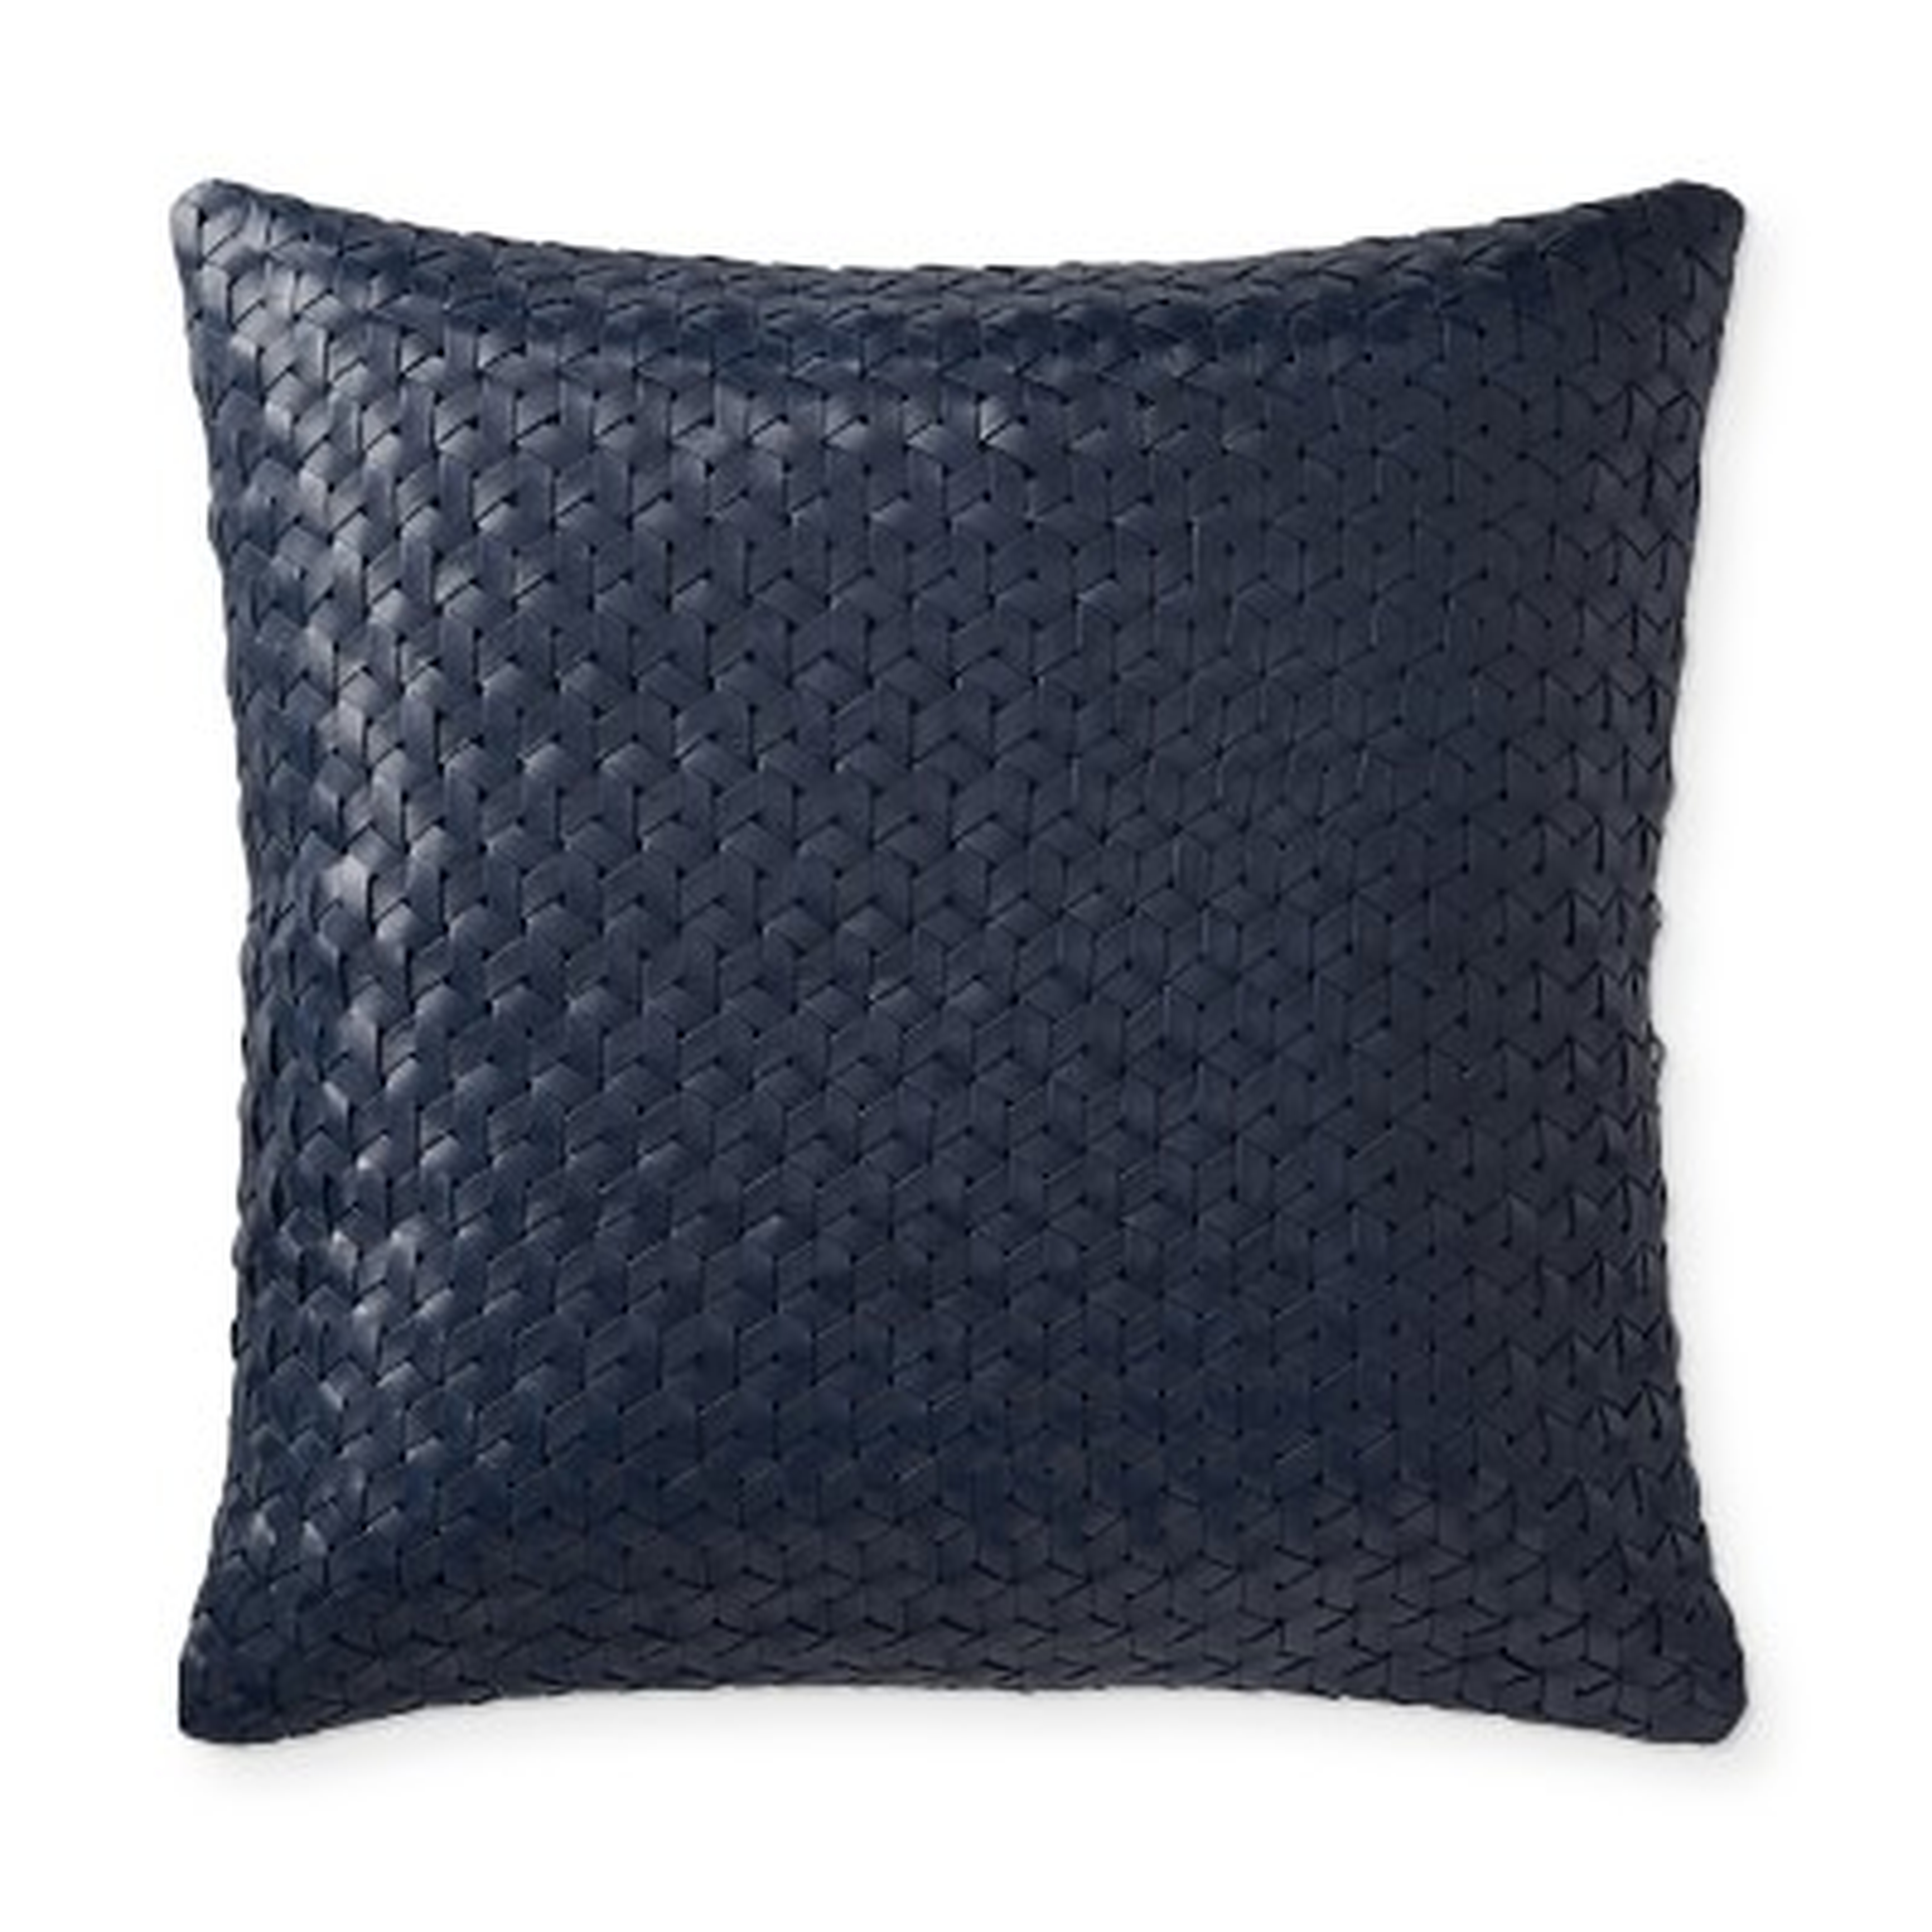 Interlace Leather Pillow Cover, 18" X 18", Navy - Williams Sonoma